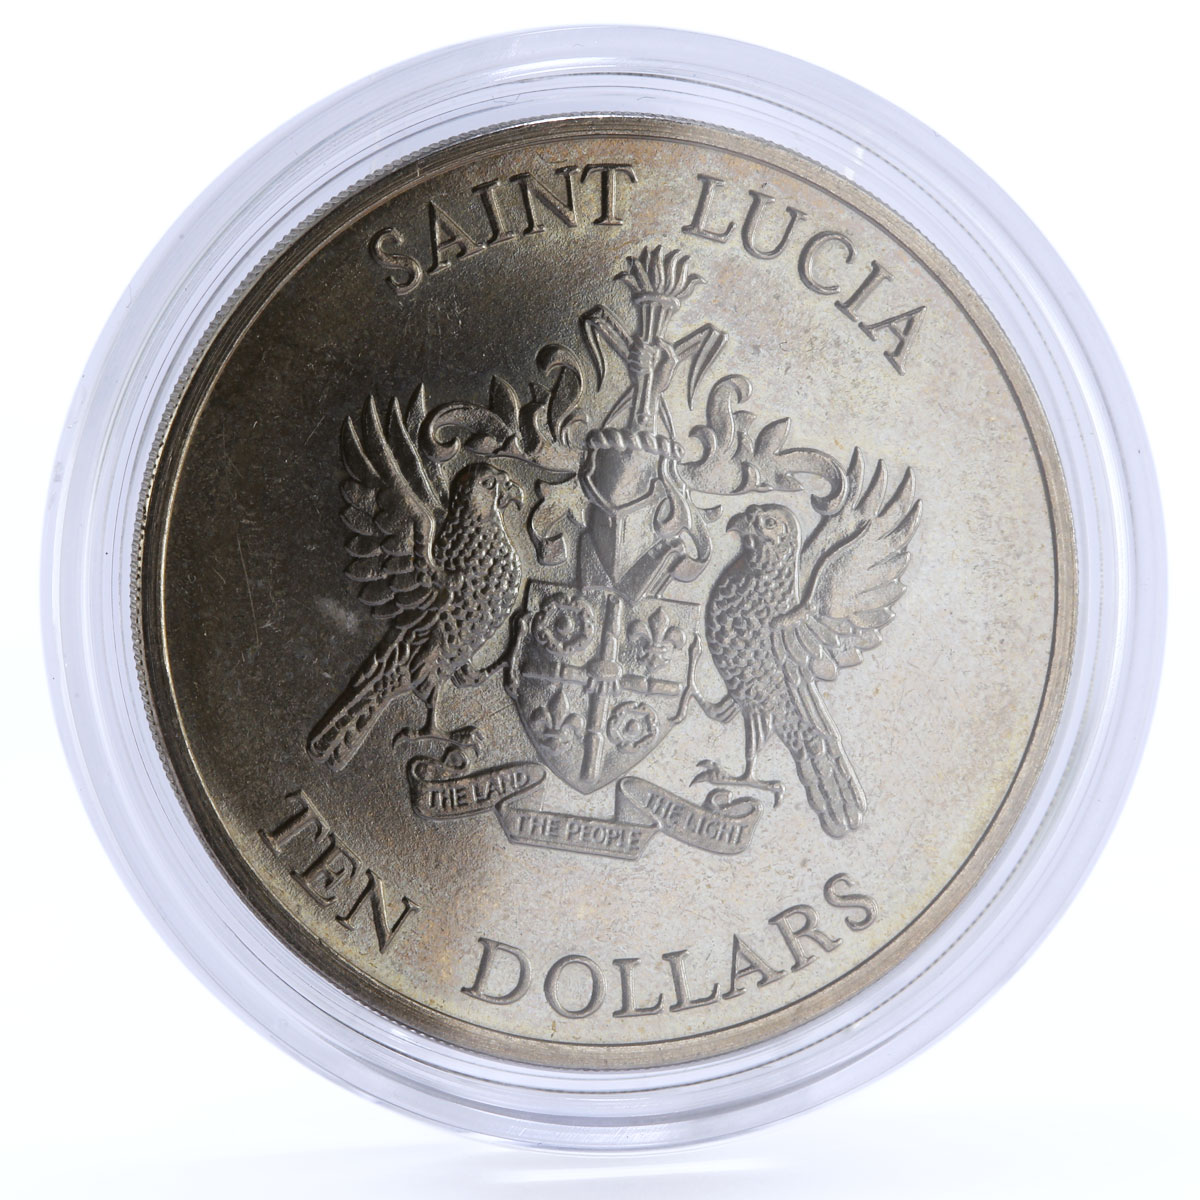 Saint Lucia 10 dollars Naval Battle of the Saints Ships Clippers CuNi coin 1982